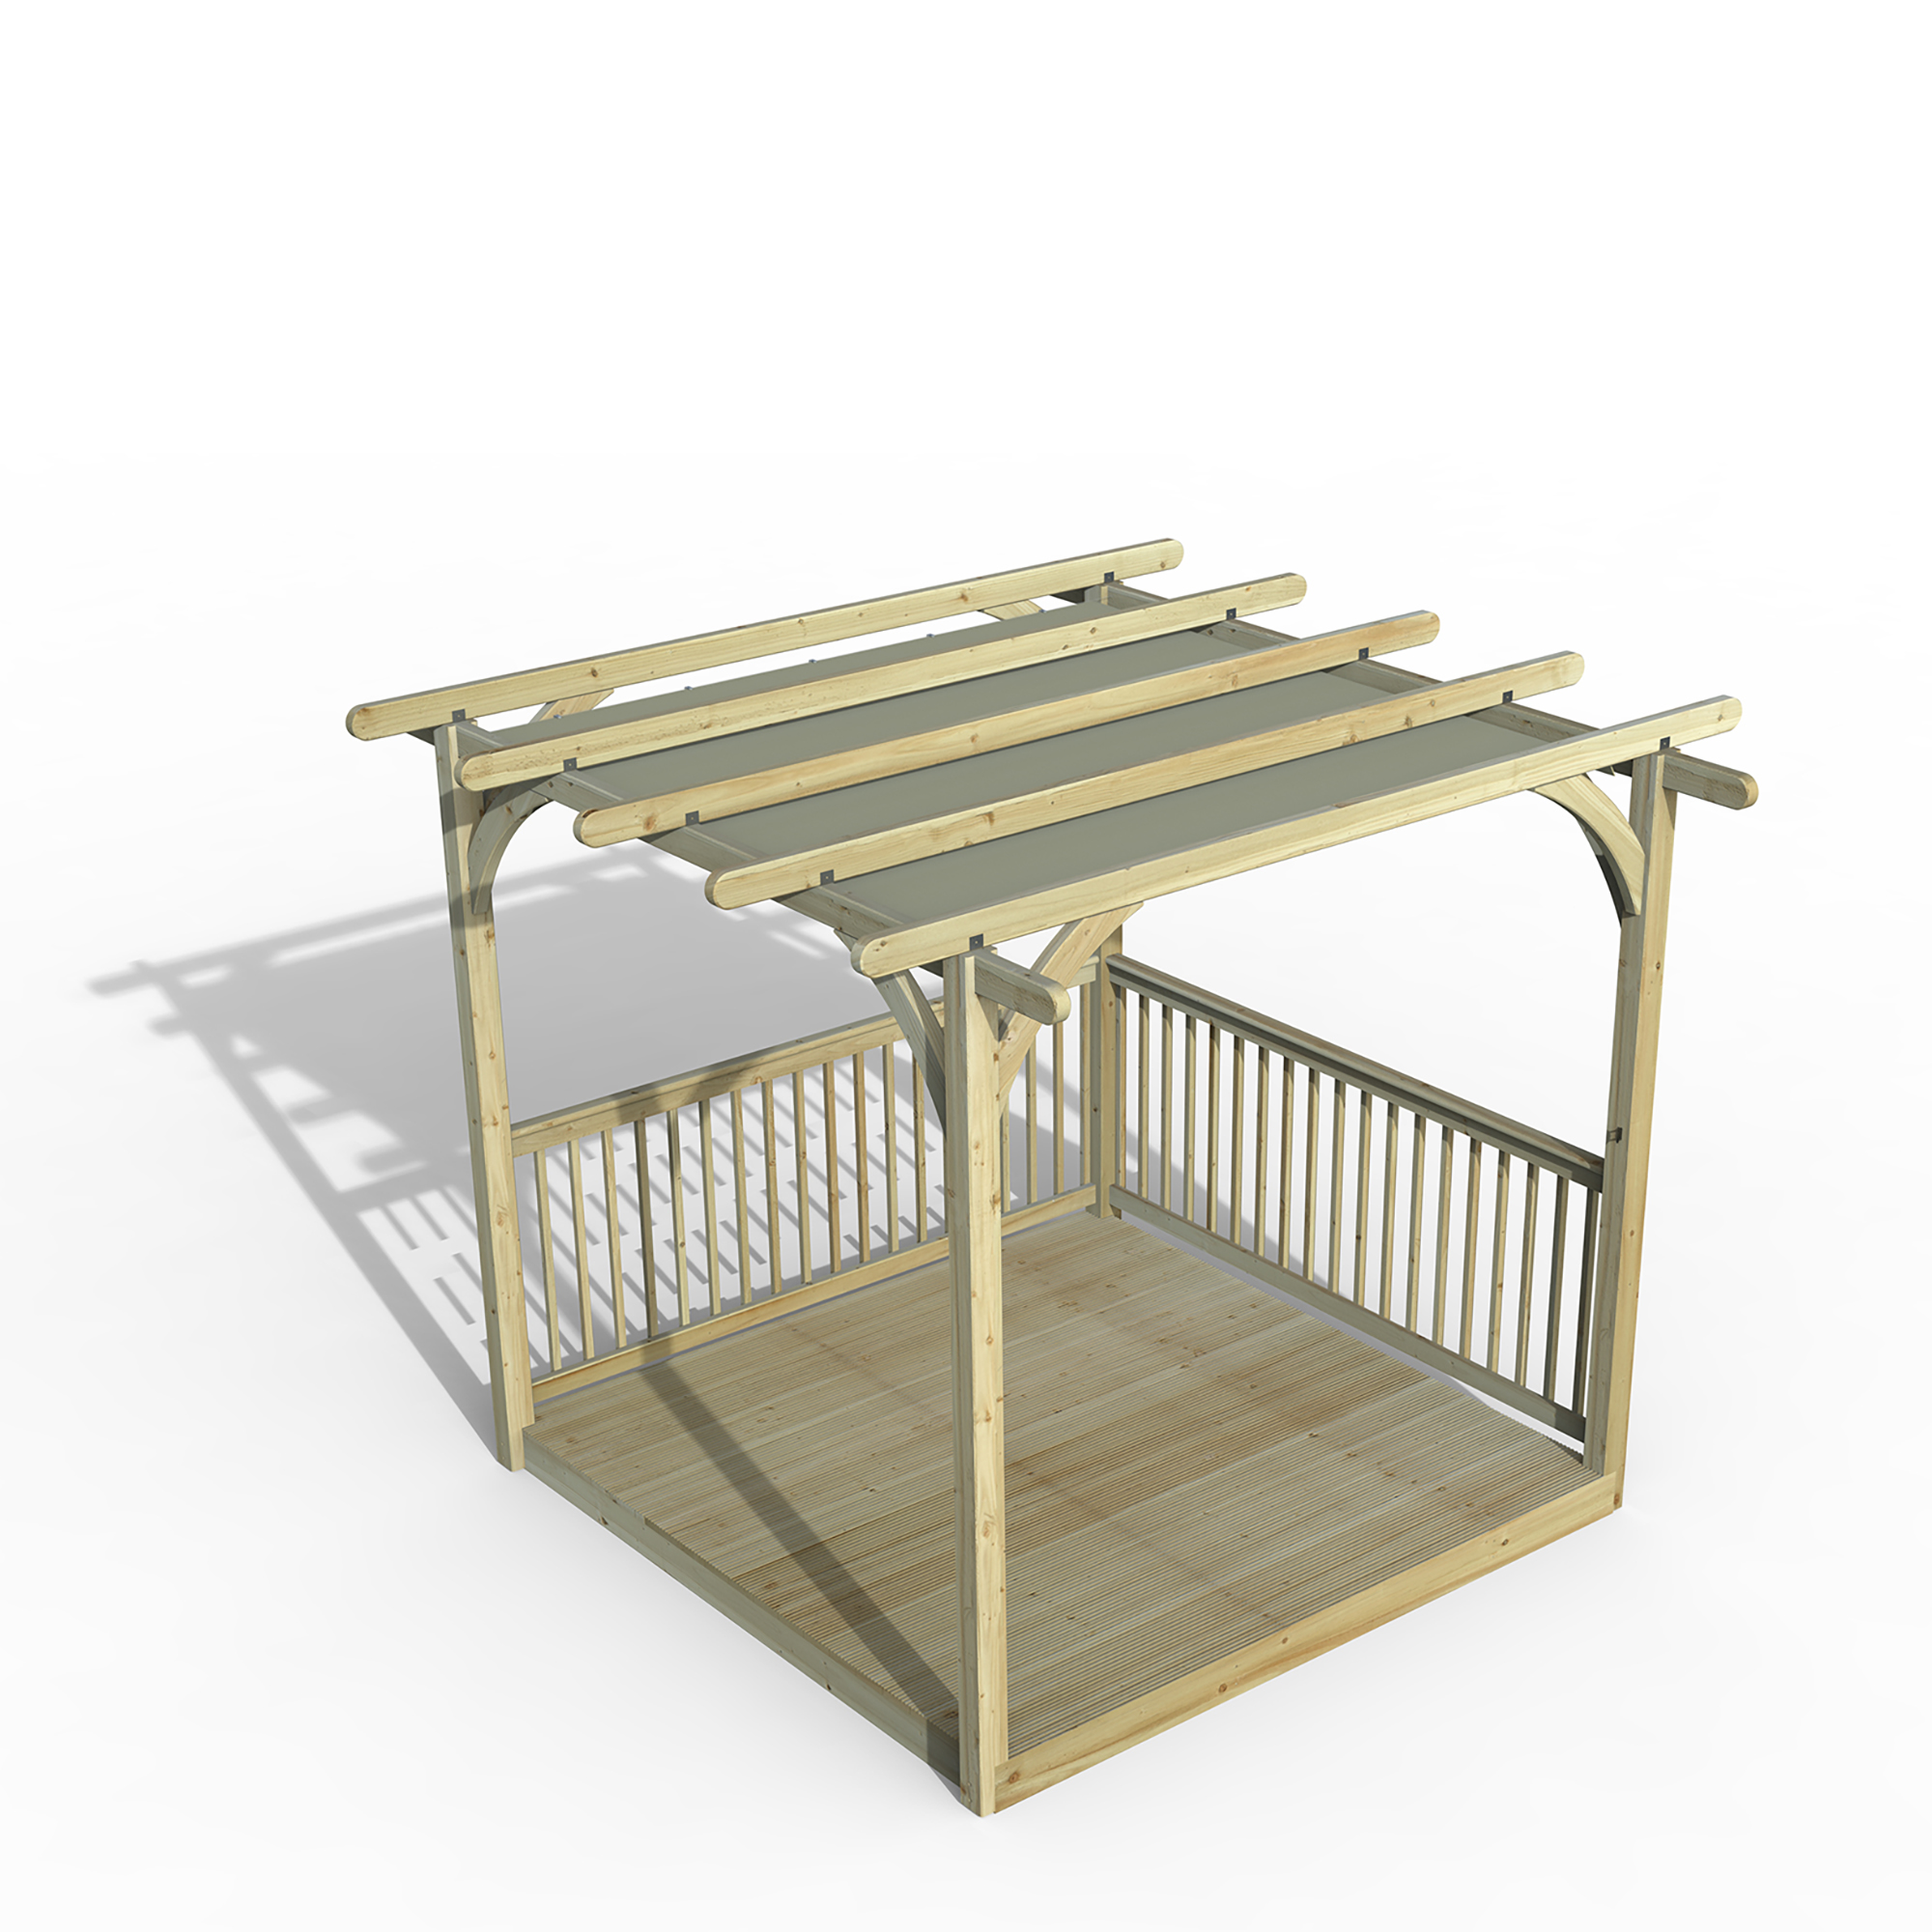 Forest Garden 2.4 x 2.4m Ultima Pergola and Decking Kit with Canopy (Floor Included)